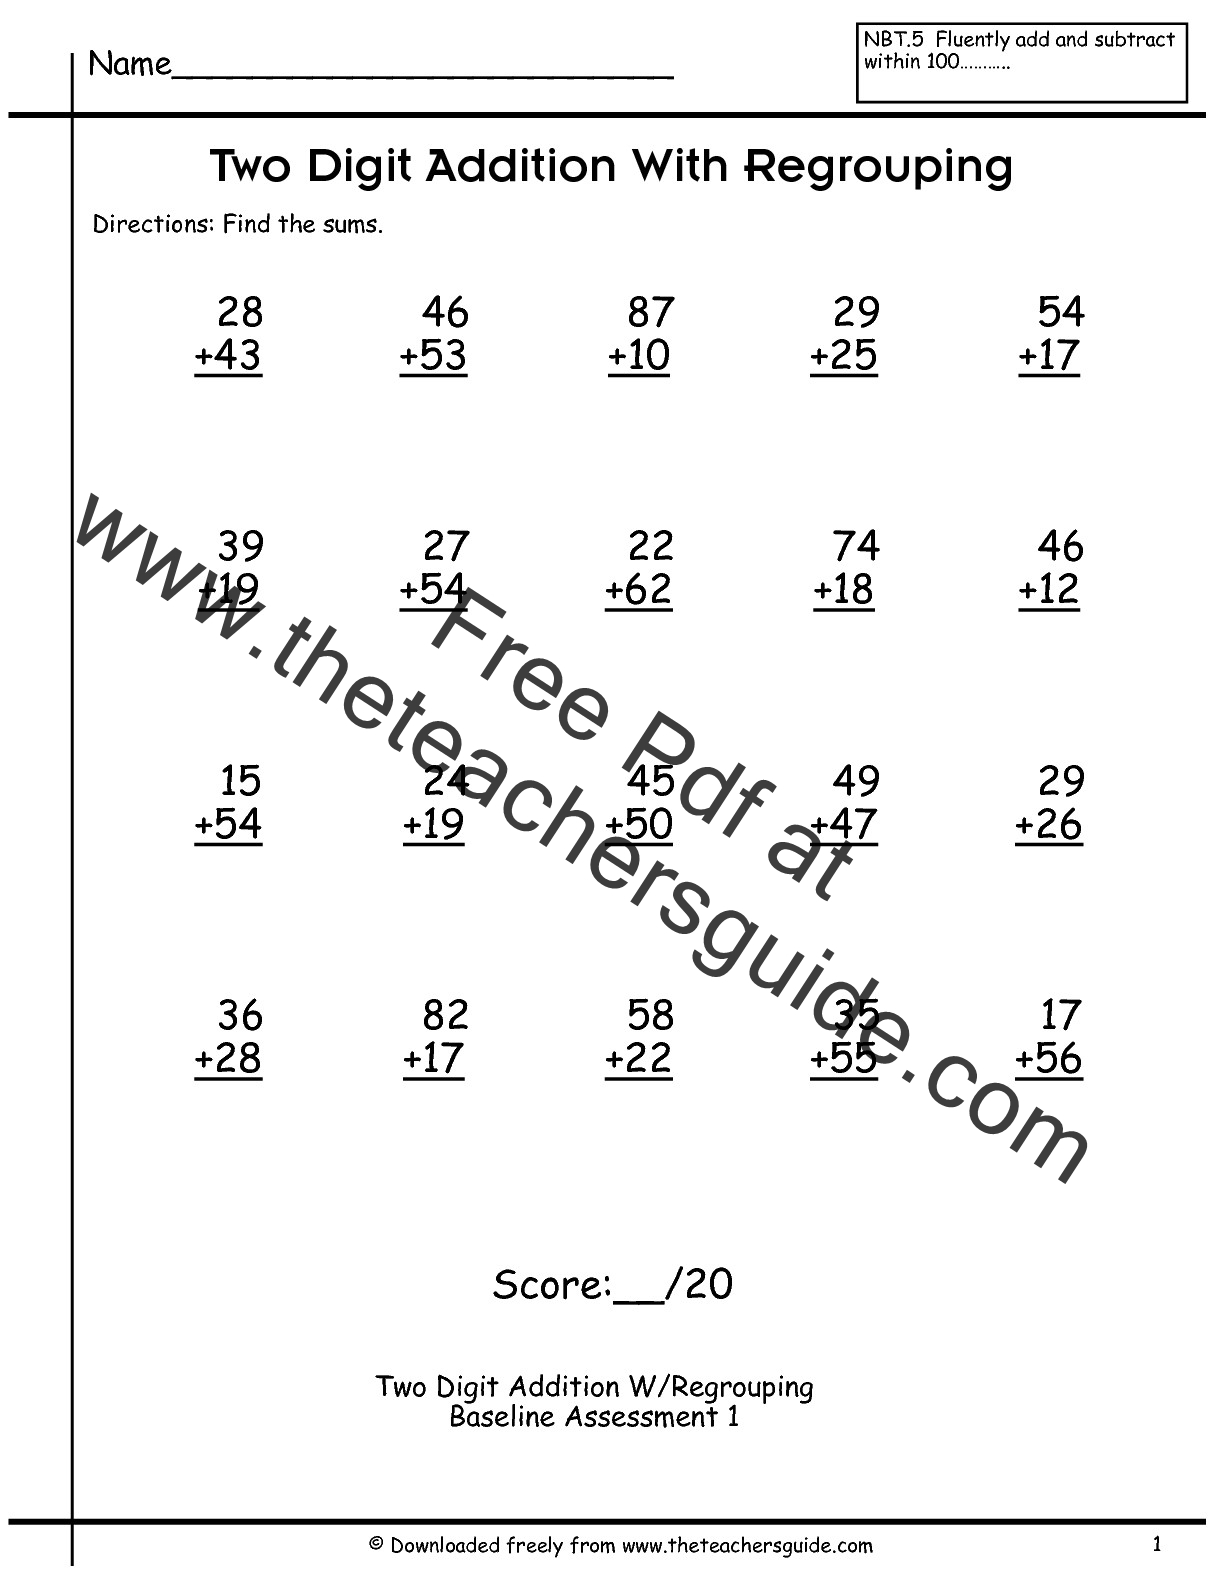 two-digit-addition-worksheets-from-the-teacher-s-guide